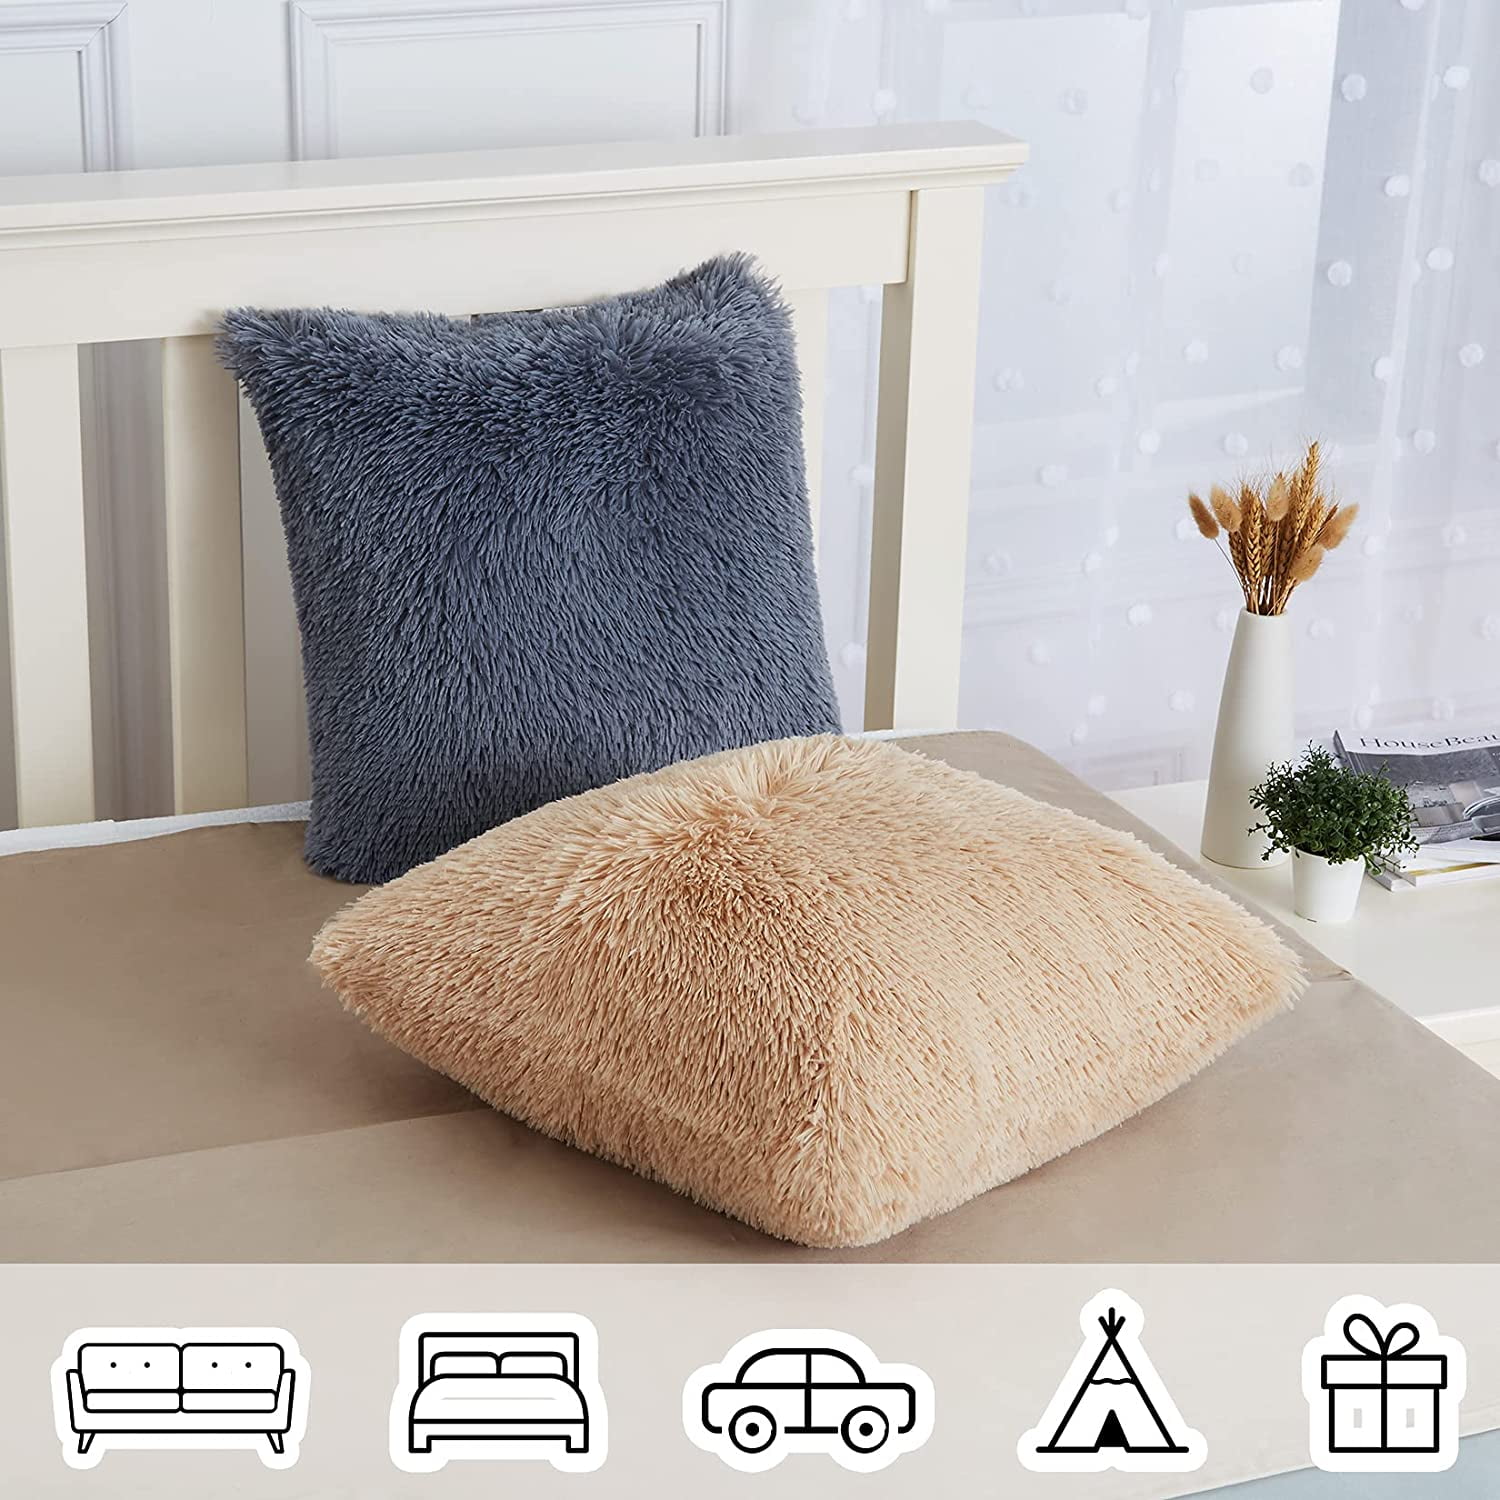 inchgrass Faux Fur Throw Pillow Cover Cushion Covers Long Hair Luxury Soft  Decorative Pillowcase Fuzzy Pillow Without Insert for Bed Couch Sofa